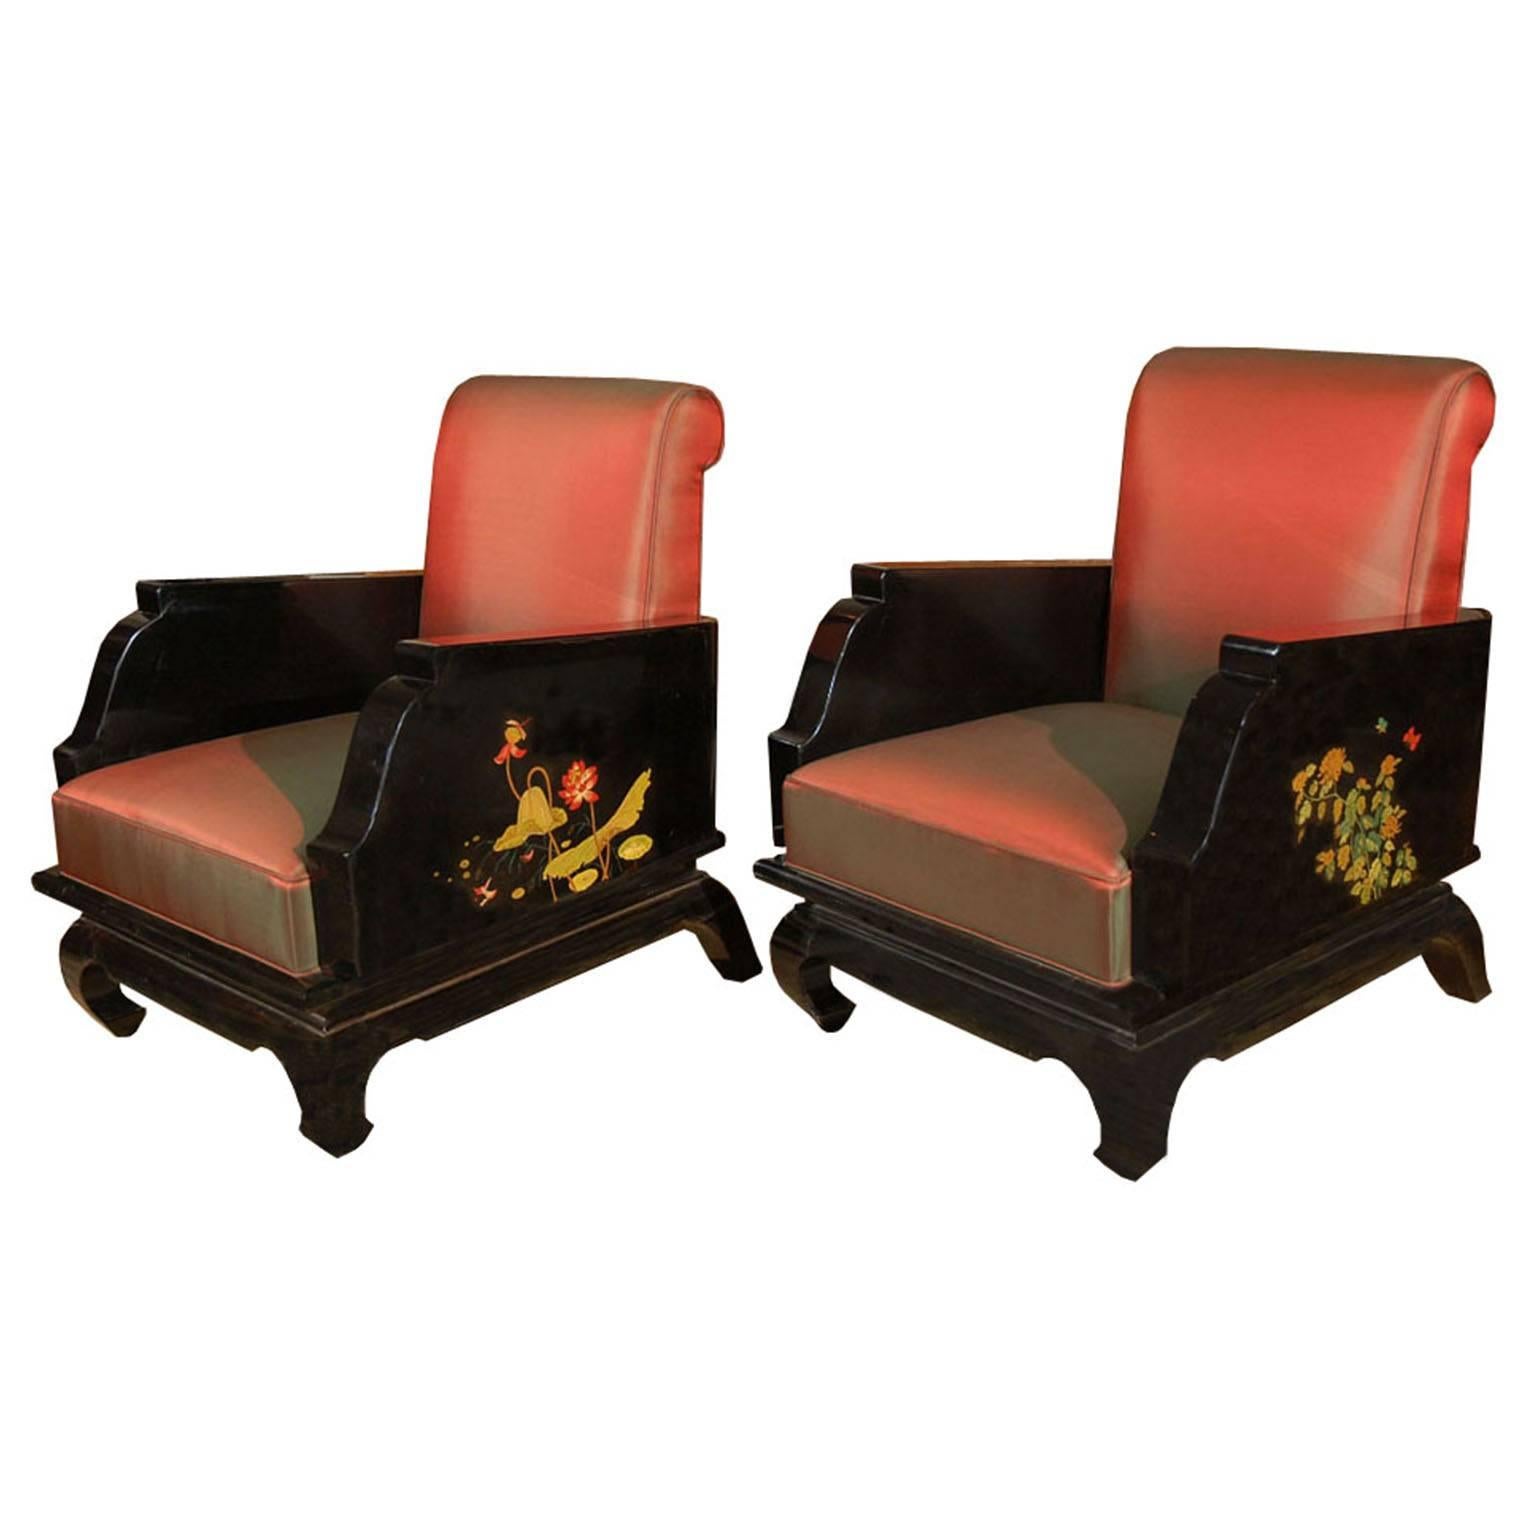 Pair of Hand-Painted Chinoiserie Armchairs For Sale